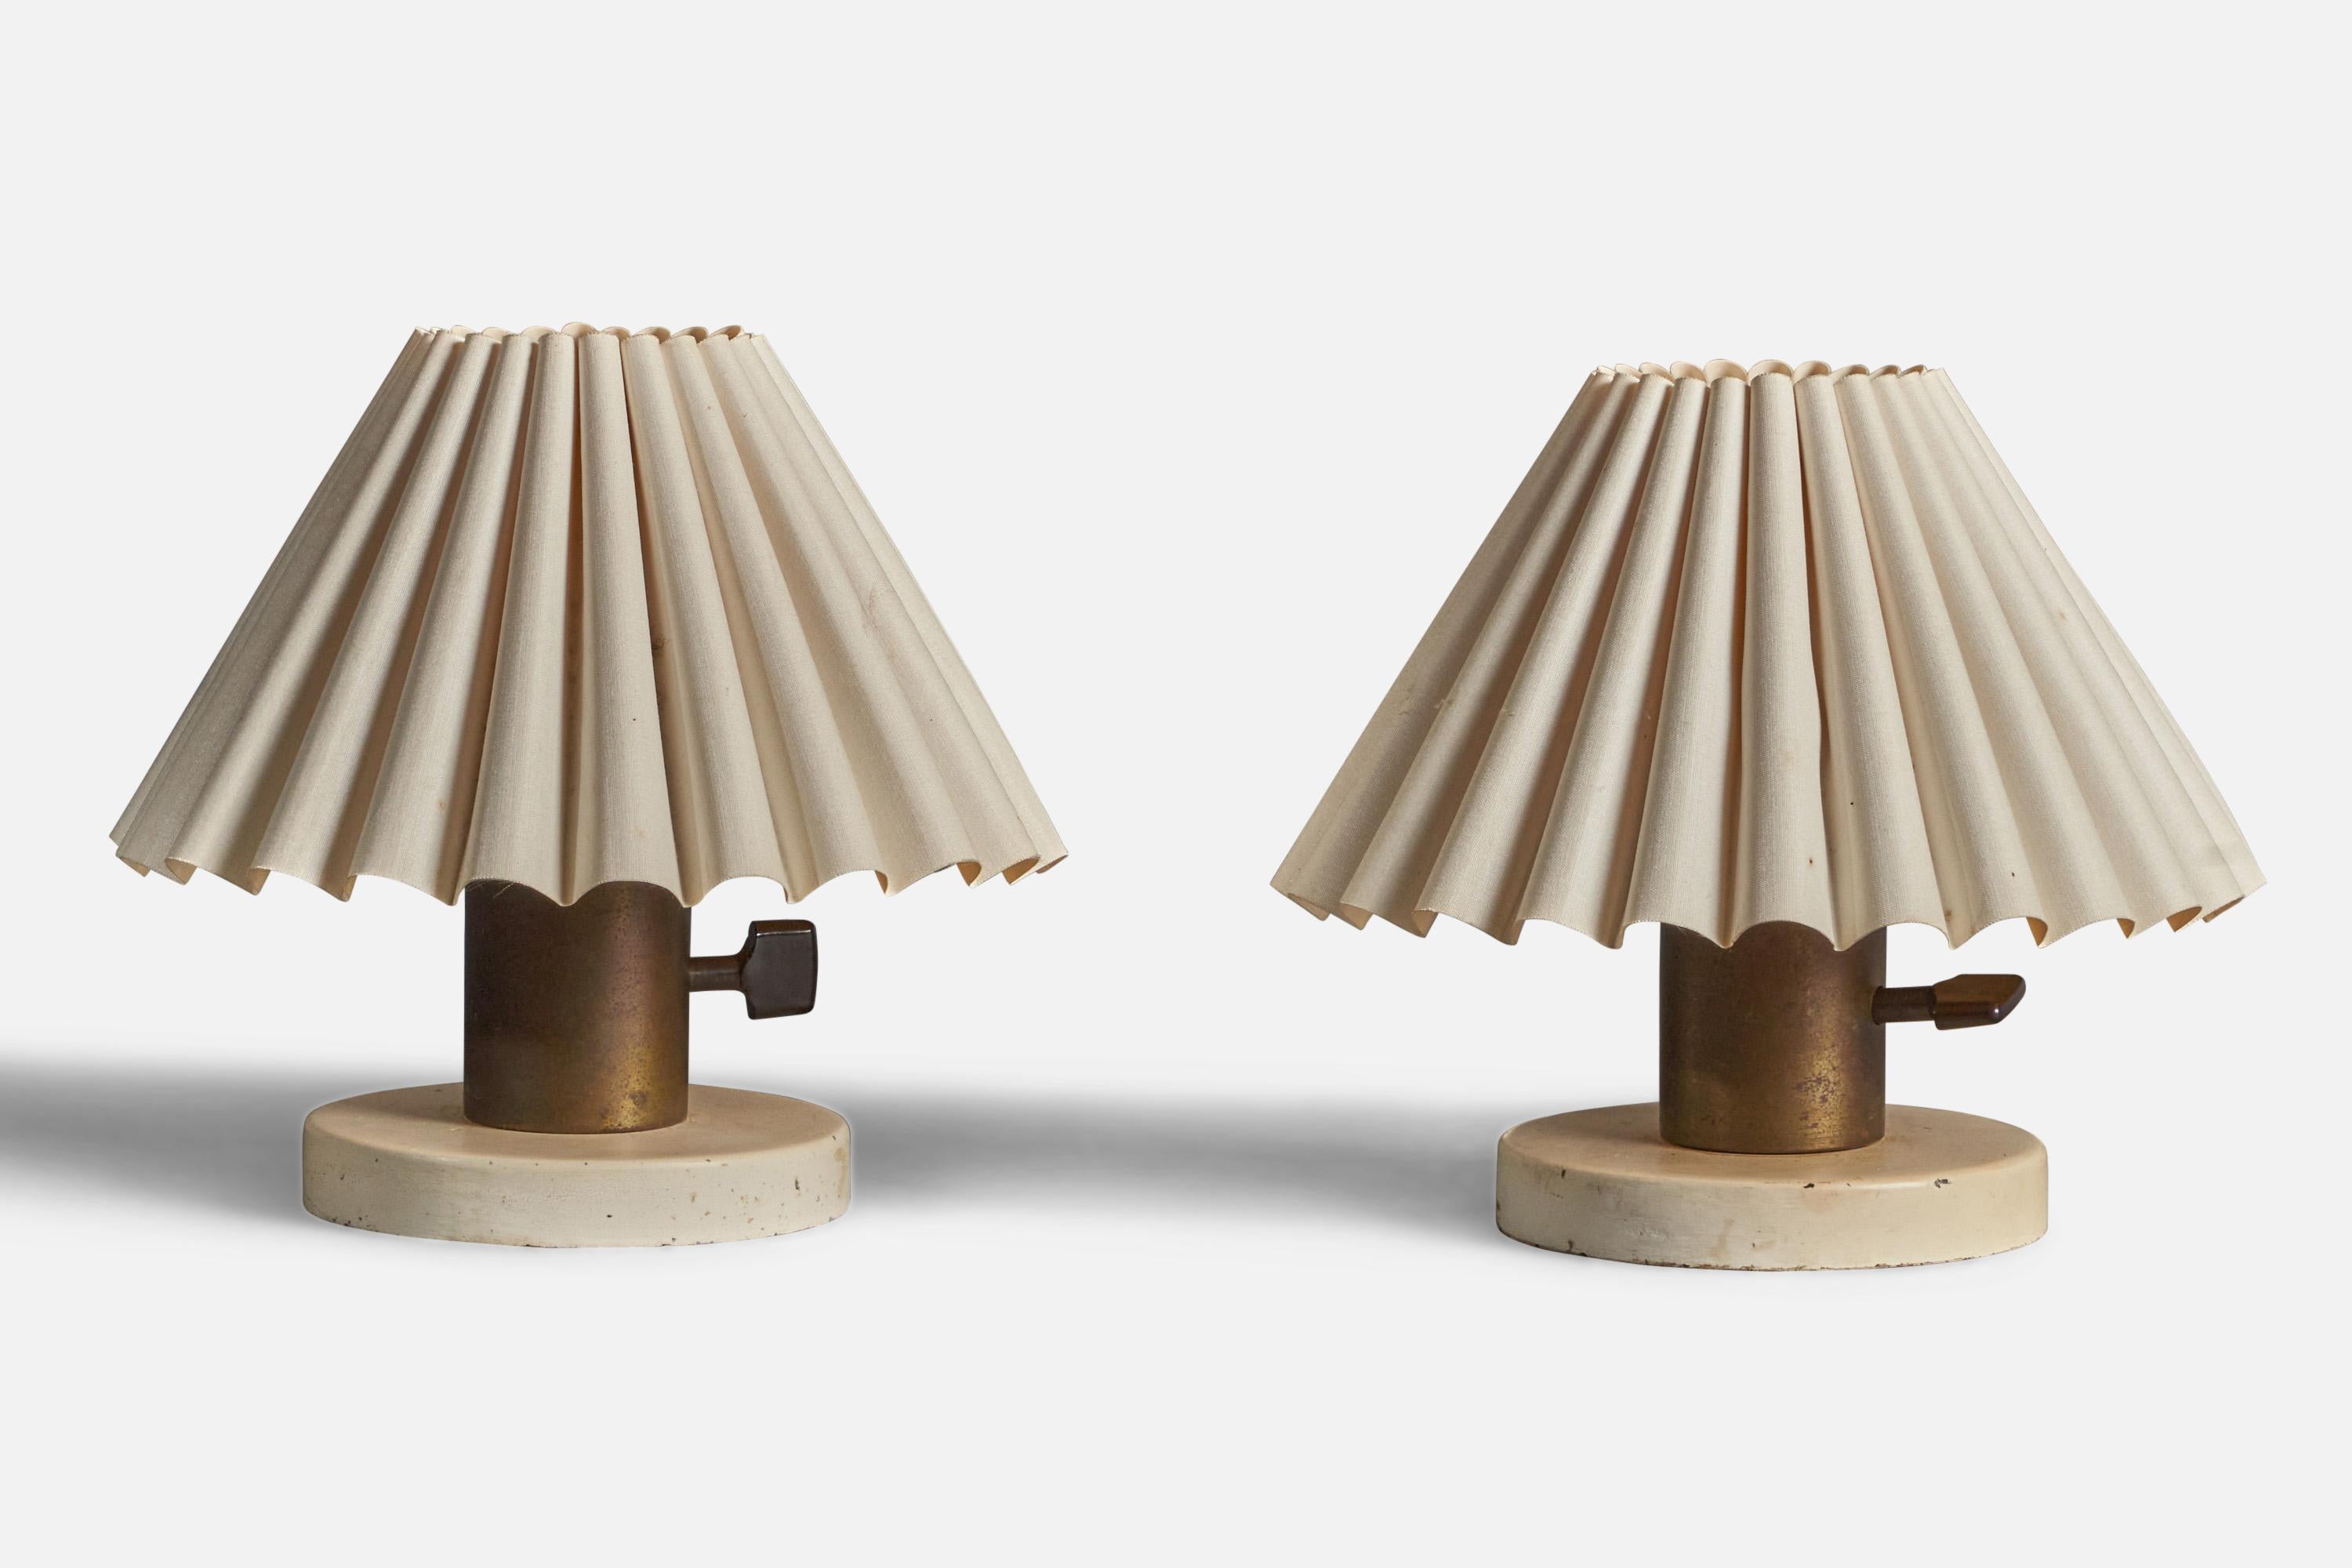 A pair of brass, white-lacquered metal and white paper lampshade table lamps designed and produced in Denmark, 1940s.

Overall Dimensions (inches): 7.5” H x 7.75” Diameter
Bulb Specifications: E-26 Bulb
Number of Sockets: 1